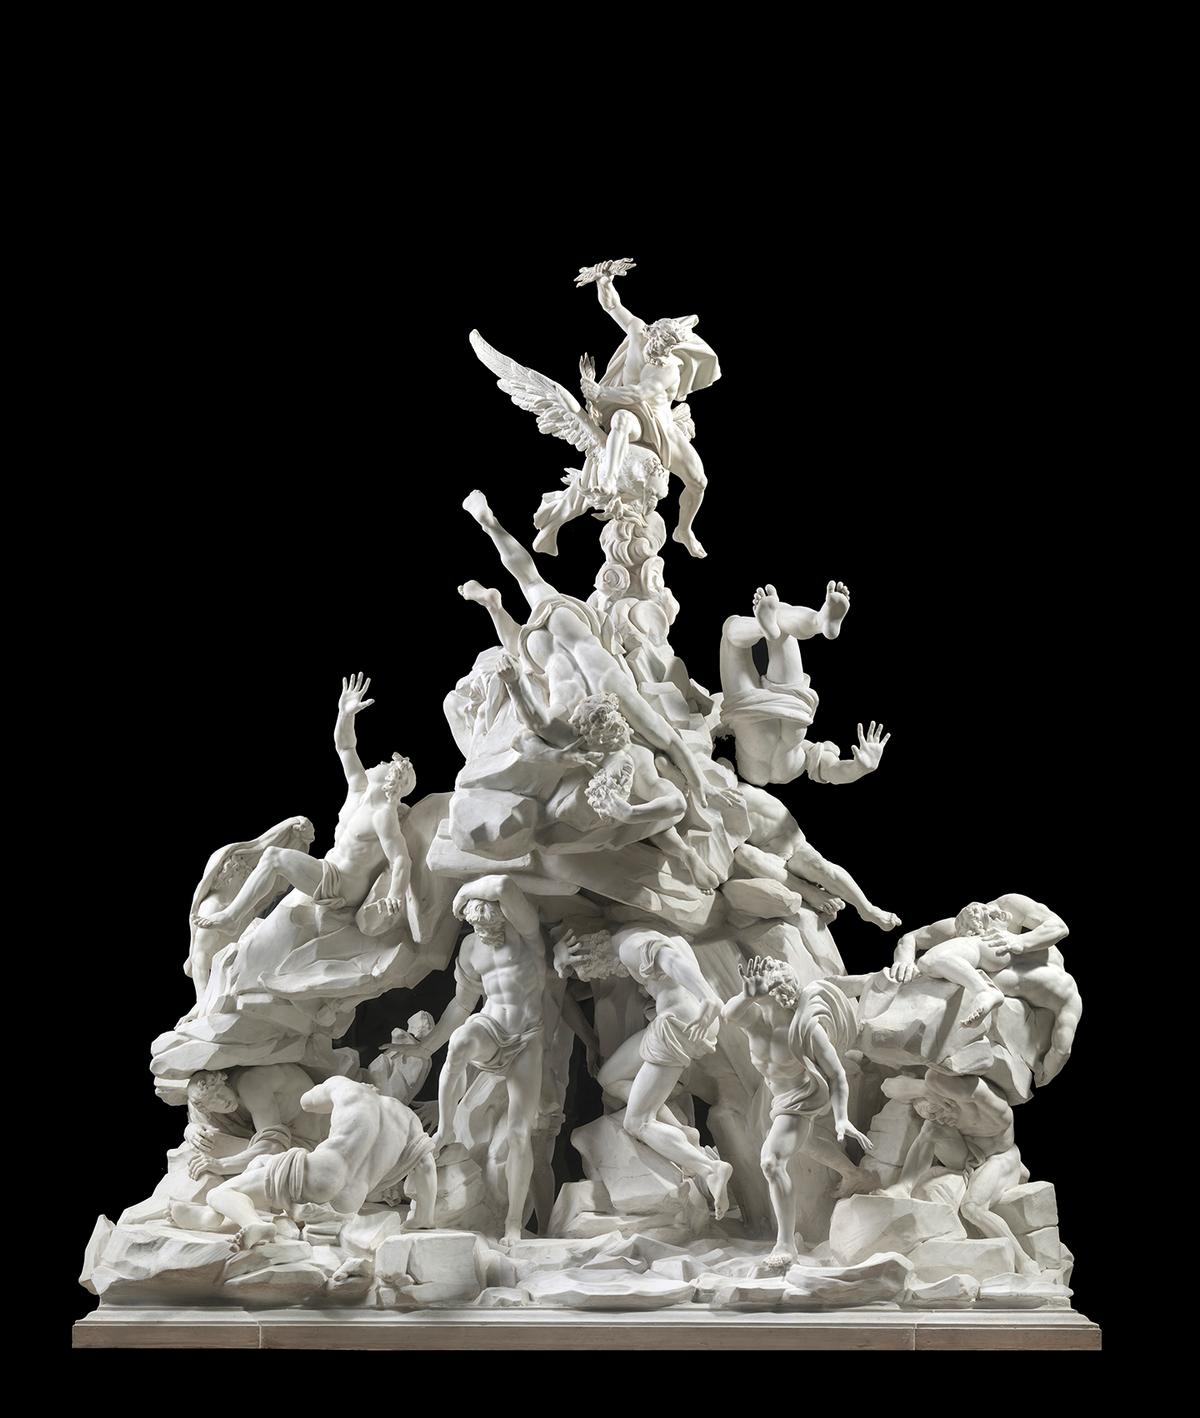 "The Fall of the Giants," 1785 and following years, by Filippo Tagliolini. Biscuit porcelain from the real Fabbrica Ferdinandea; 59.4 by 37.8 inches. (Courtesy of the Louvre)